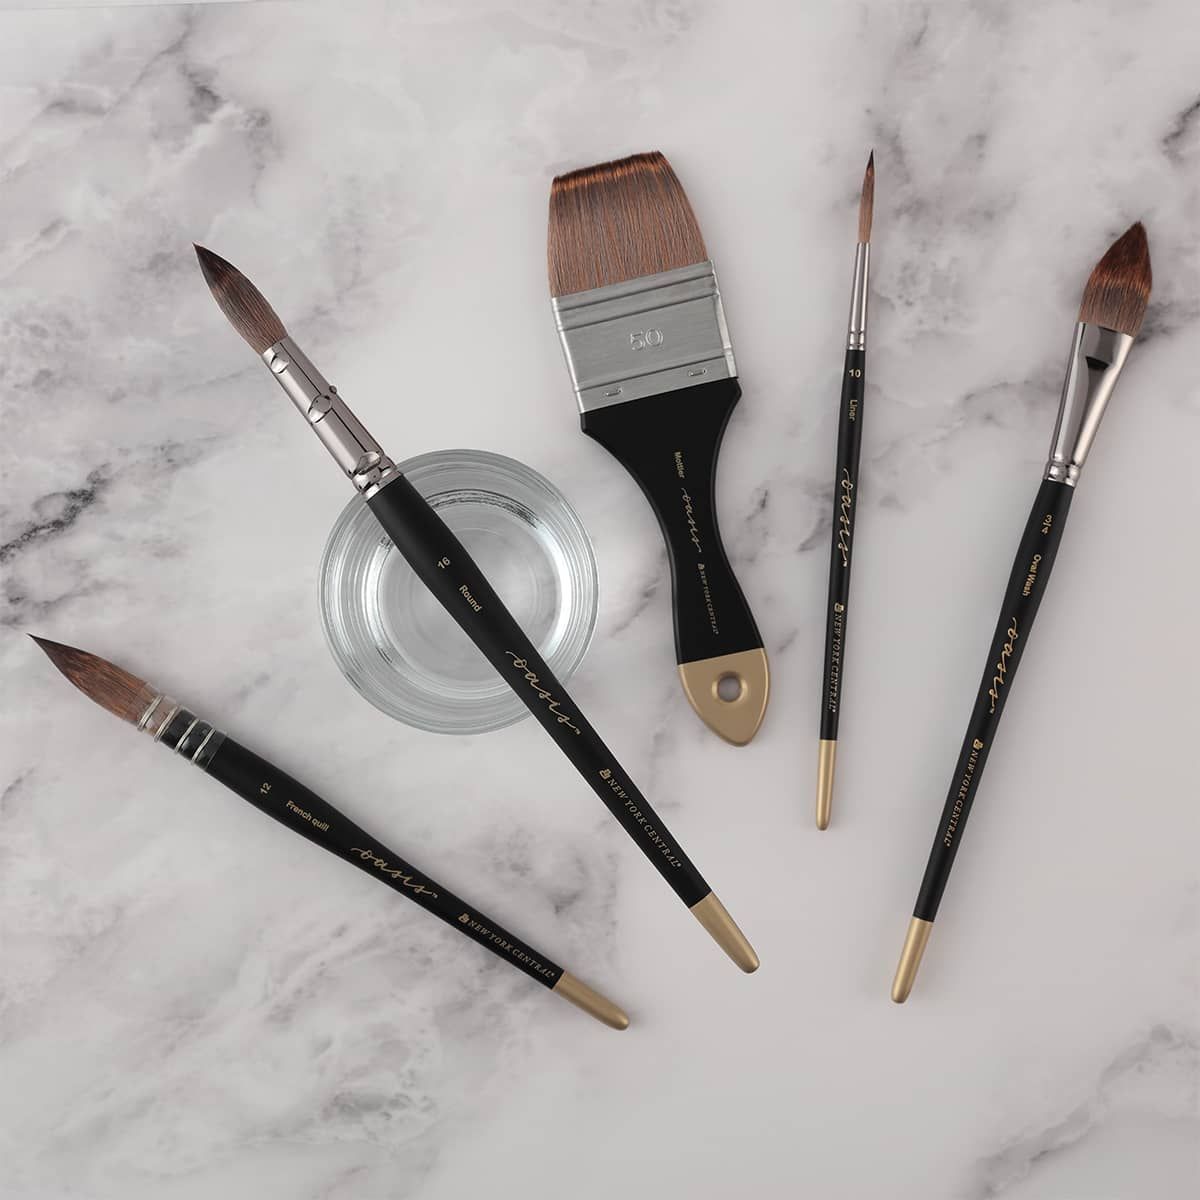 New York Central Oasis Synthetic Premium Brushes